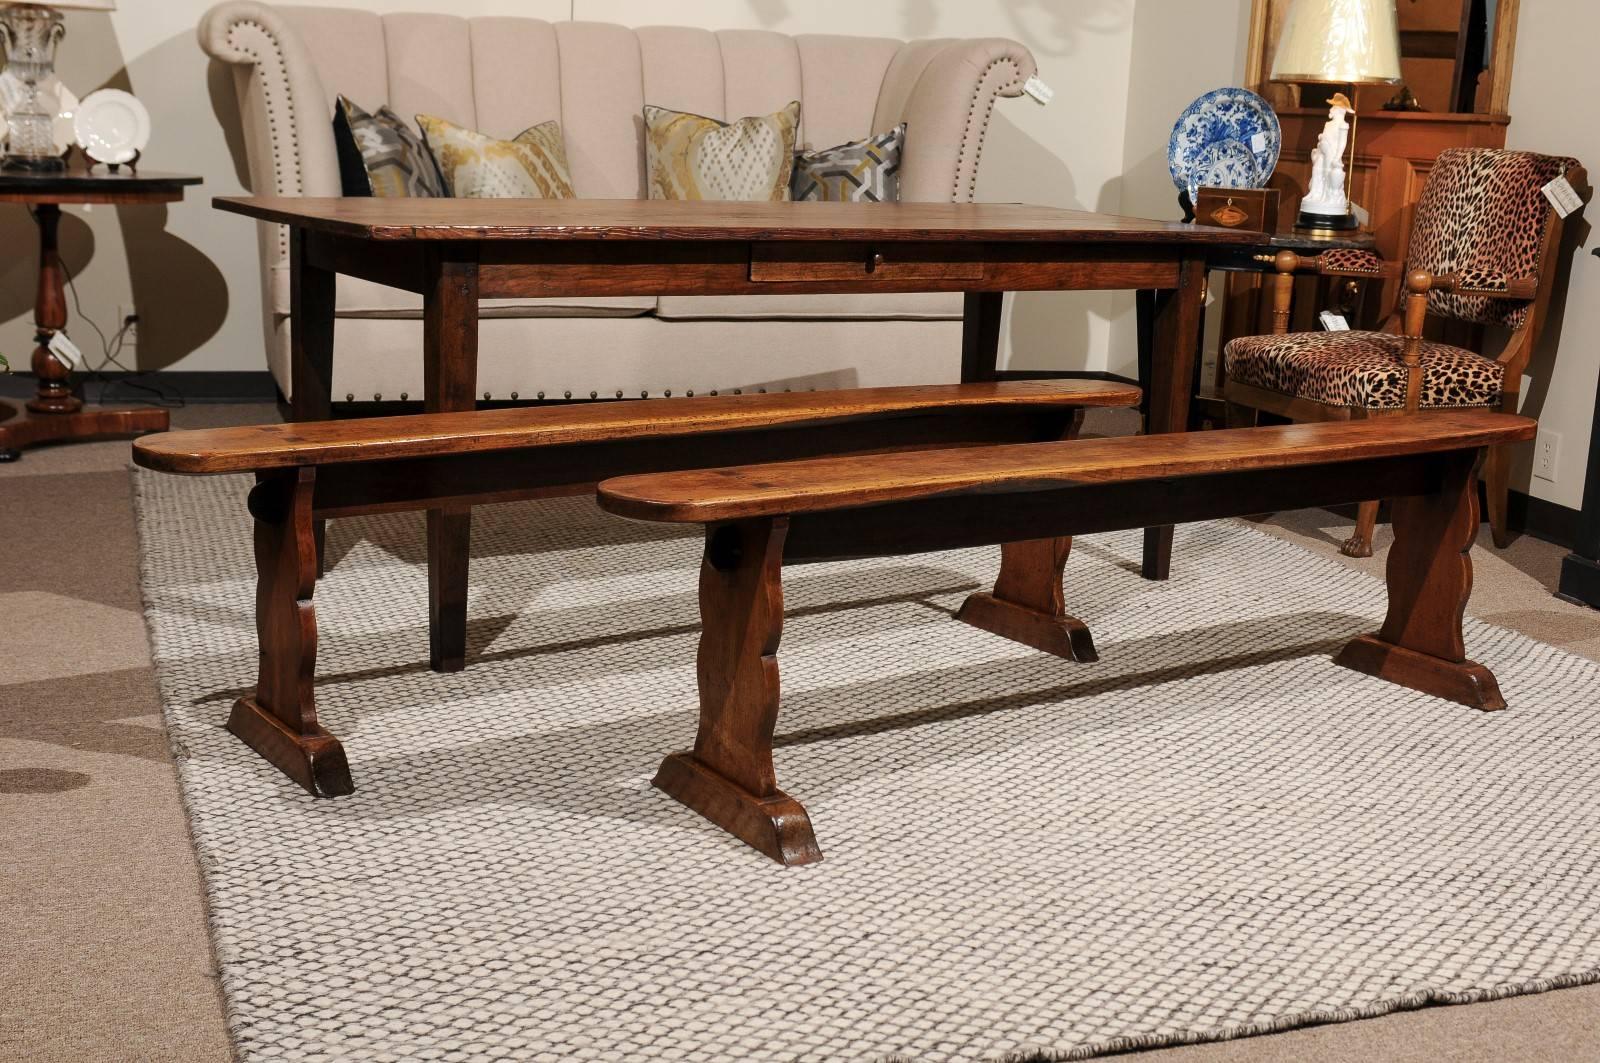 Pair of 19th century French benches, 1890
I love the  chestnut wood this bench is made from. They have great patina and lots of grain showing through. Lately, you see more and more folks are using benches at dining tables.
These are very sturdy and